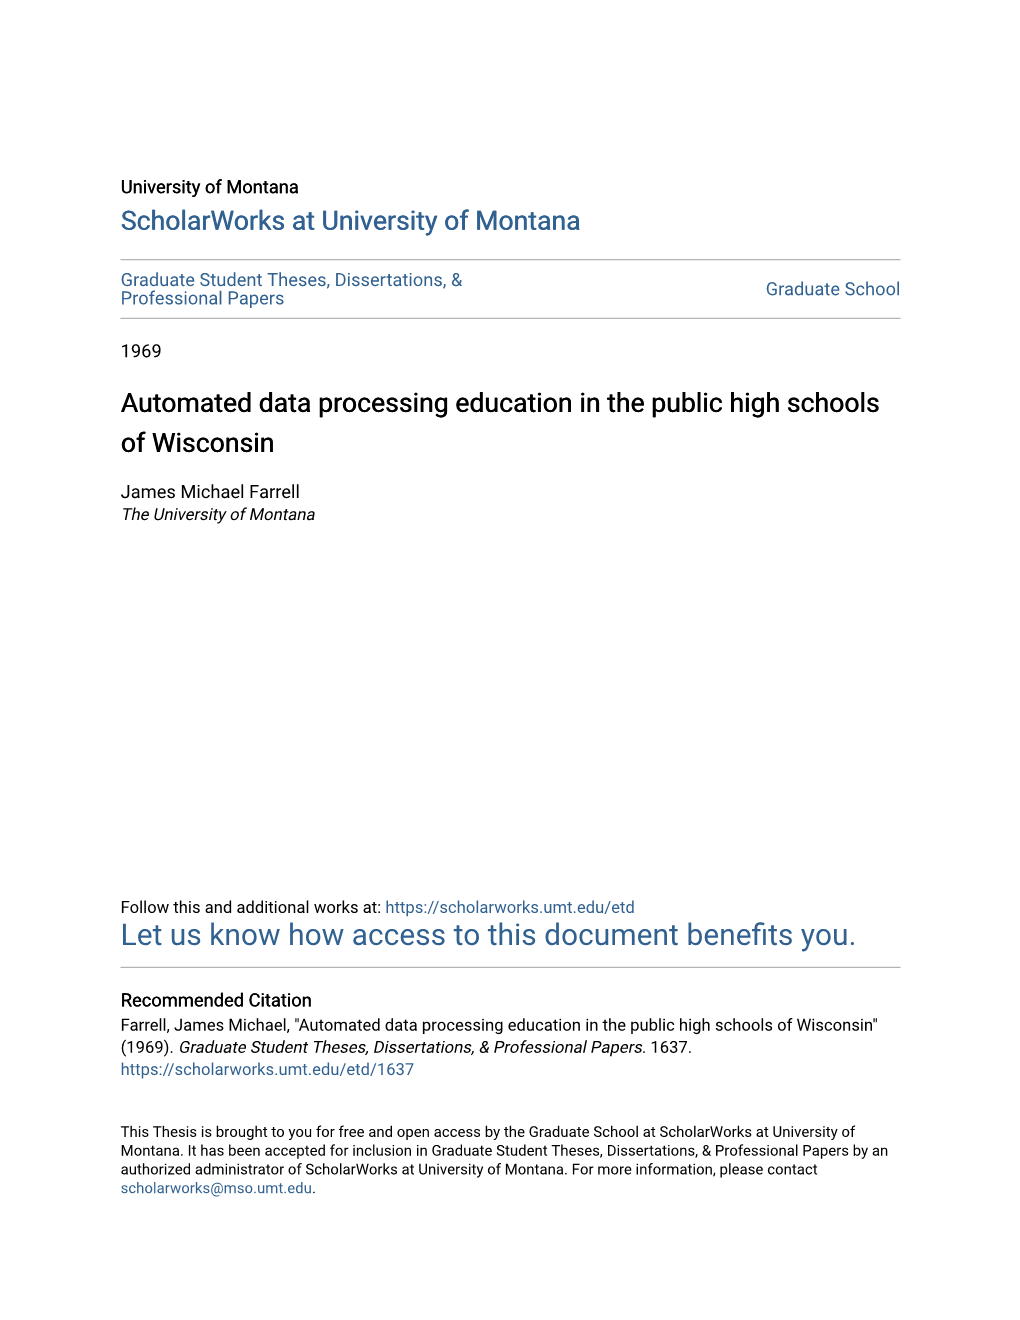 Automated Data Processing Education in the Public High Schools of Wisconsin